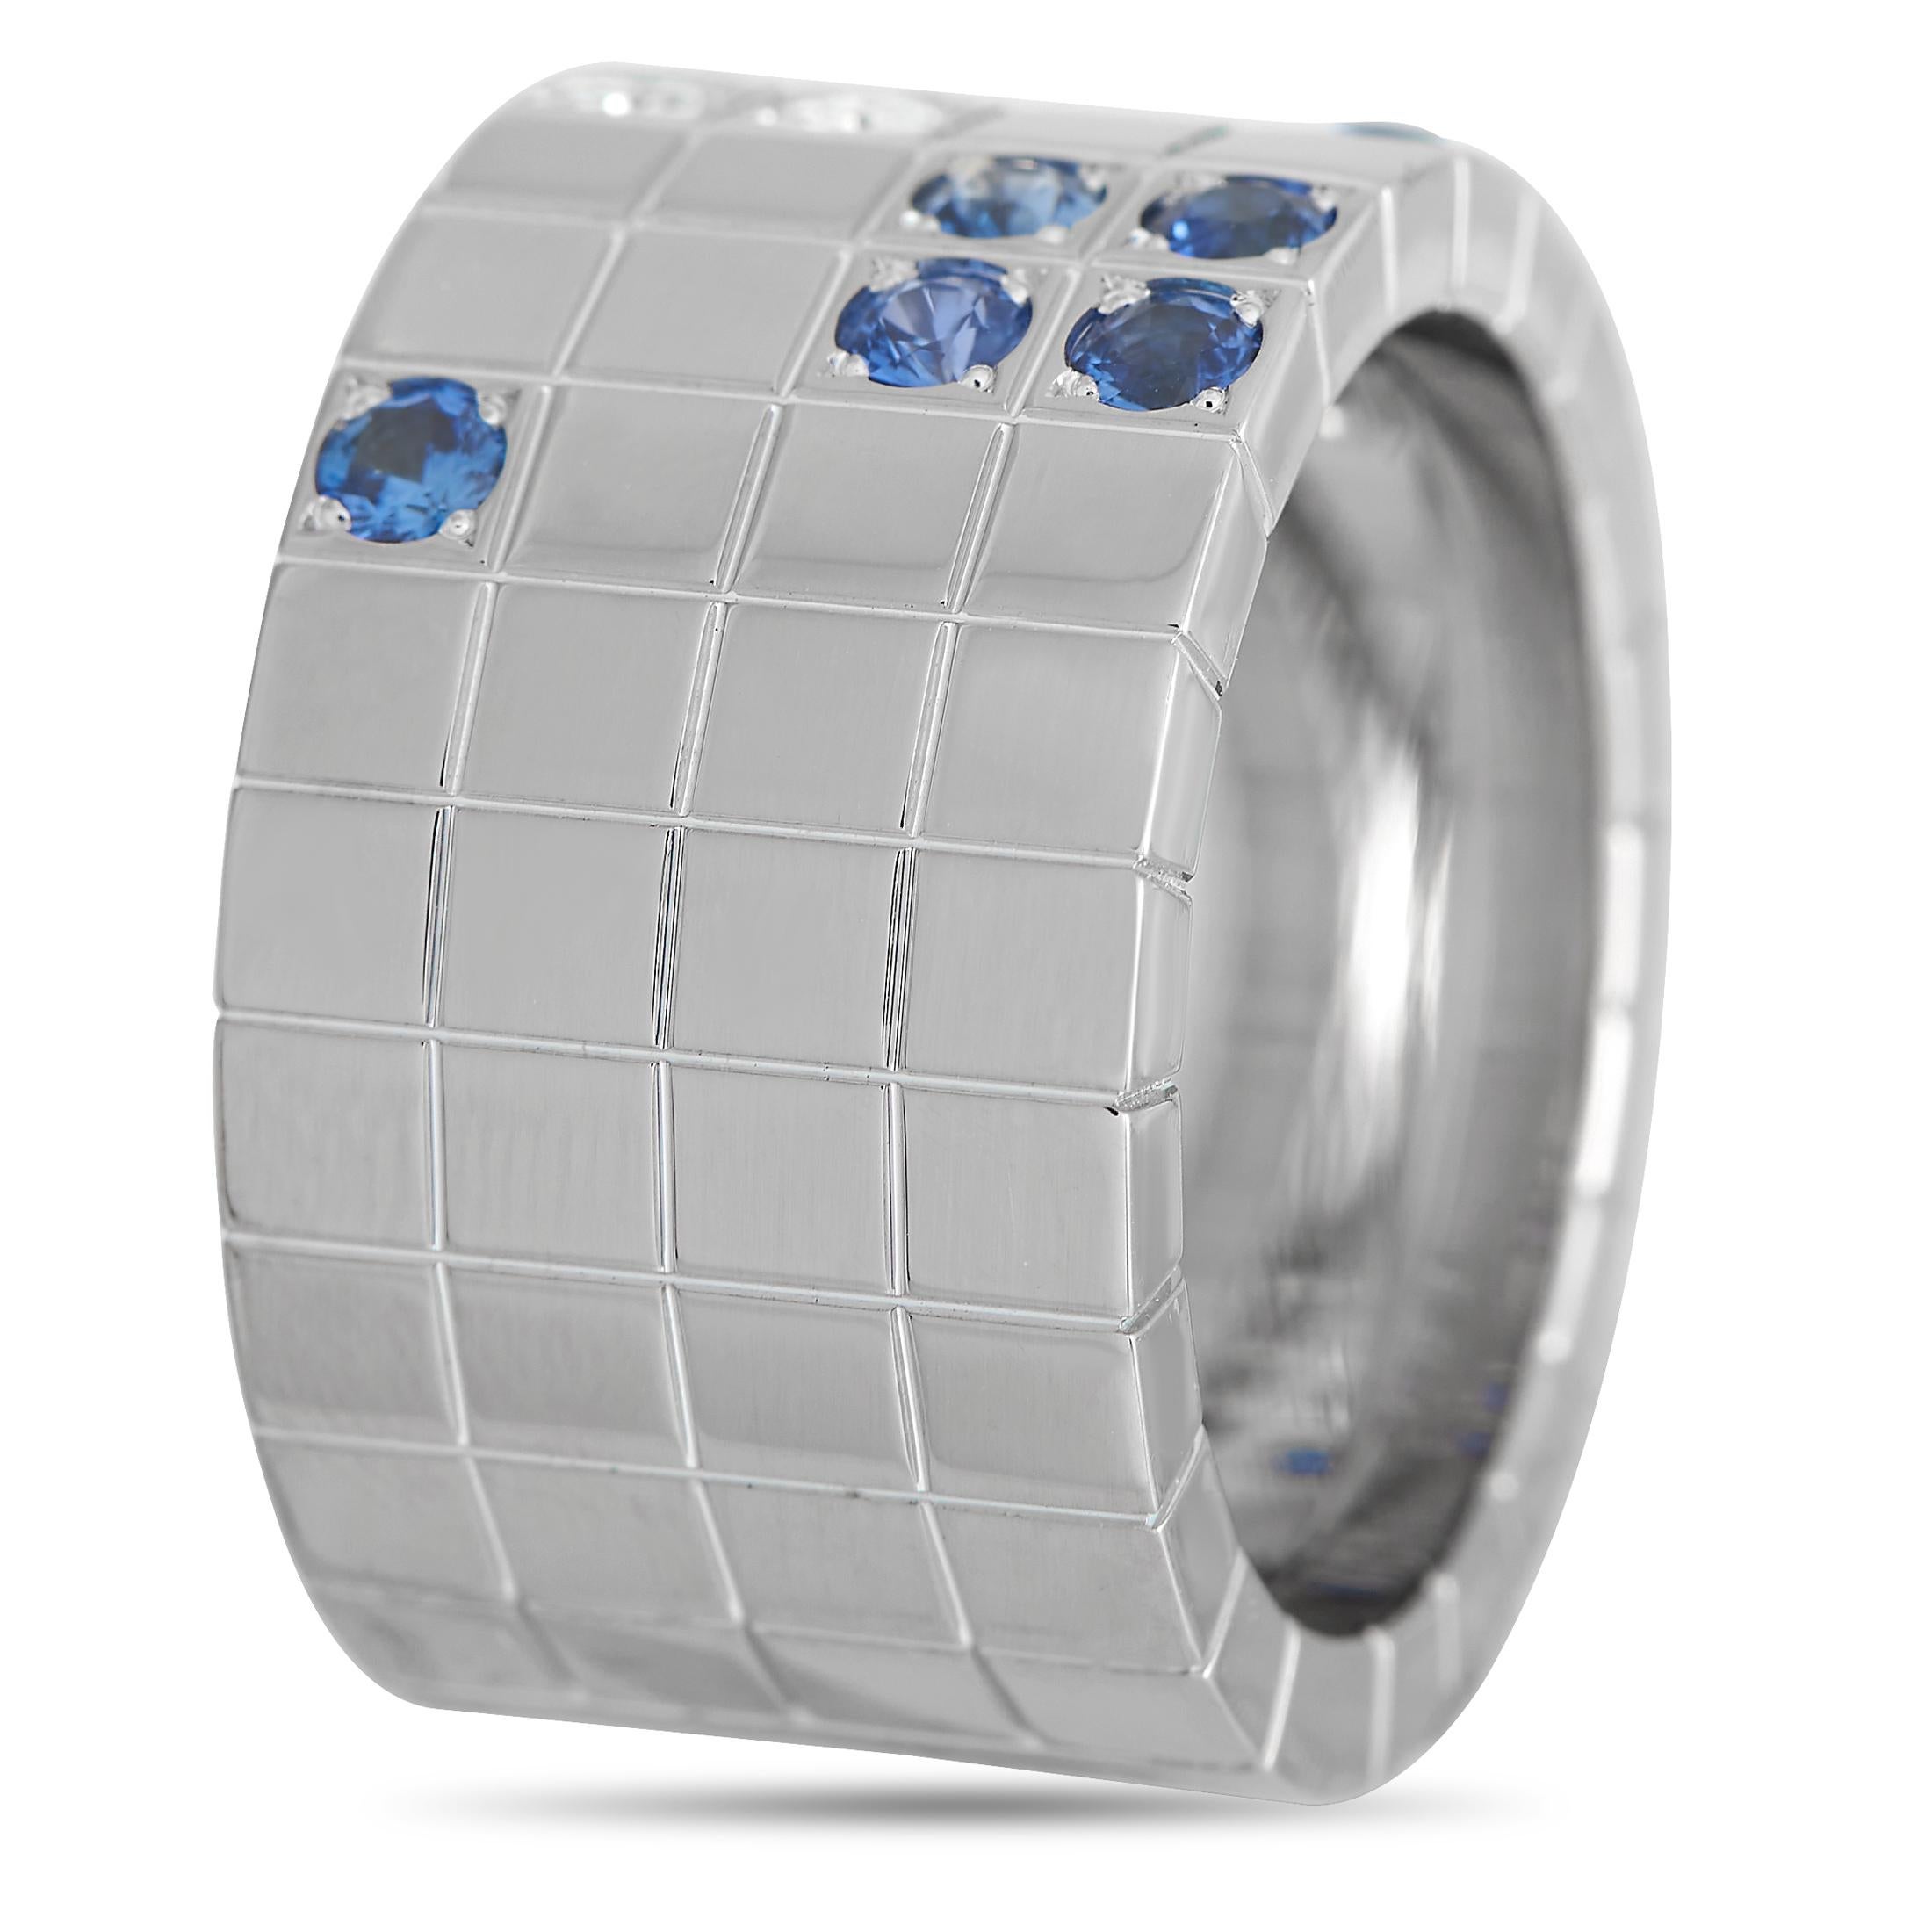 From Cartier's Lanires Collection, here is a geometric ring that radiates elegance. Its 12mm-thick white gold band features a tiled design, with perfect squares detailed with flush-set diamonds and sapphires.This Cartier Lanires 18K White Gold